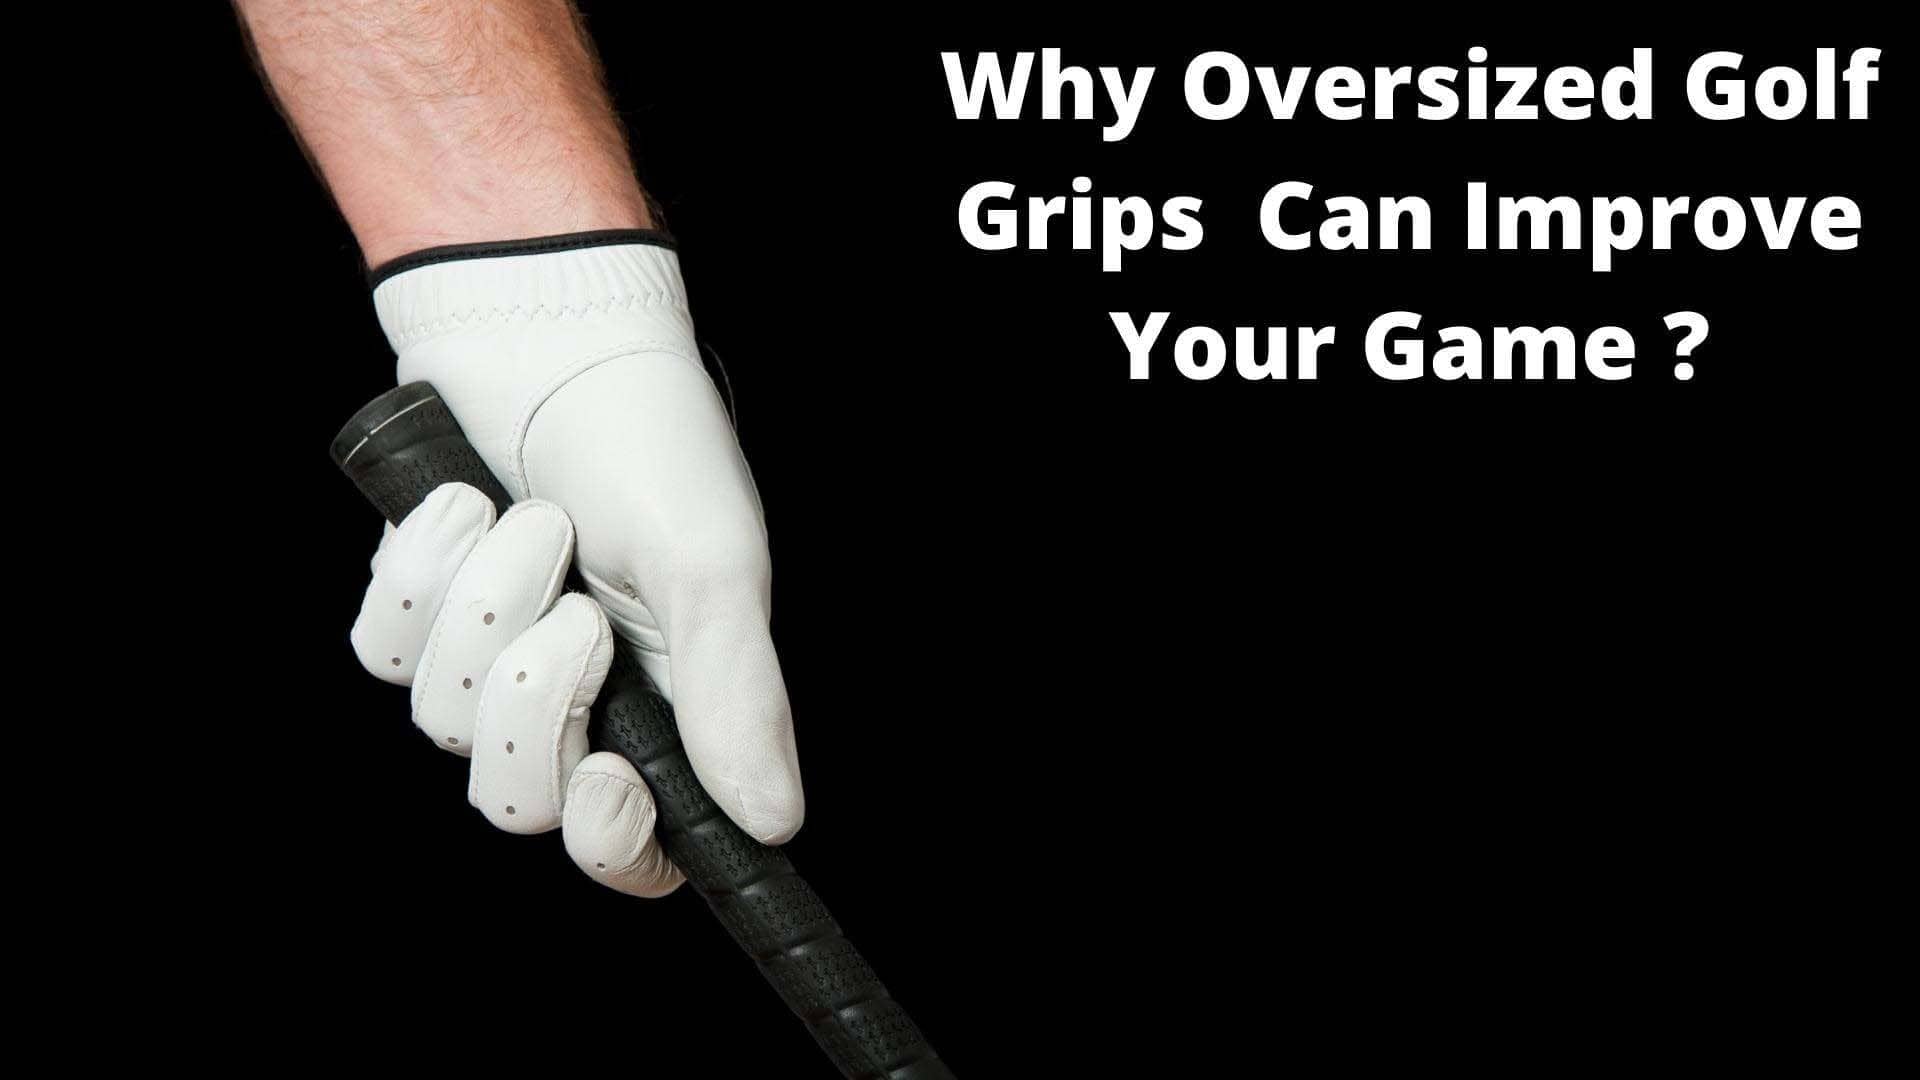 Why Oversize Golf Grips Improve Your Game